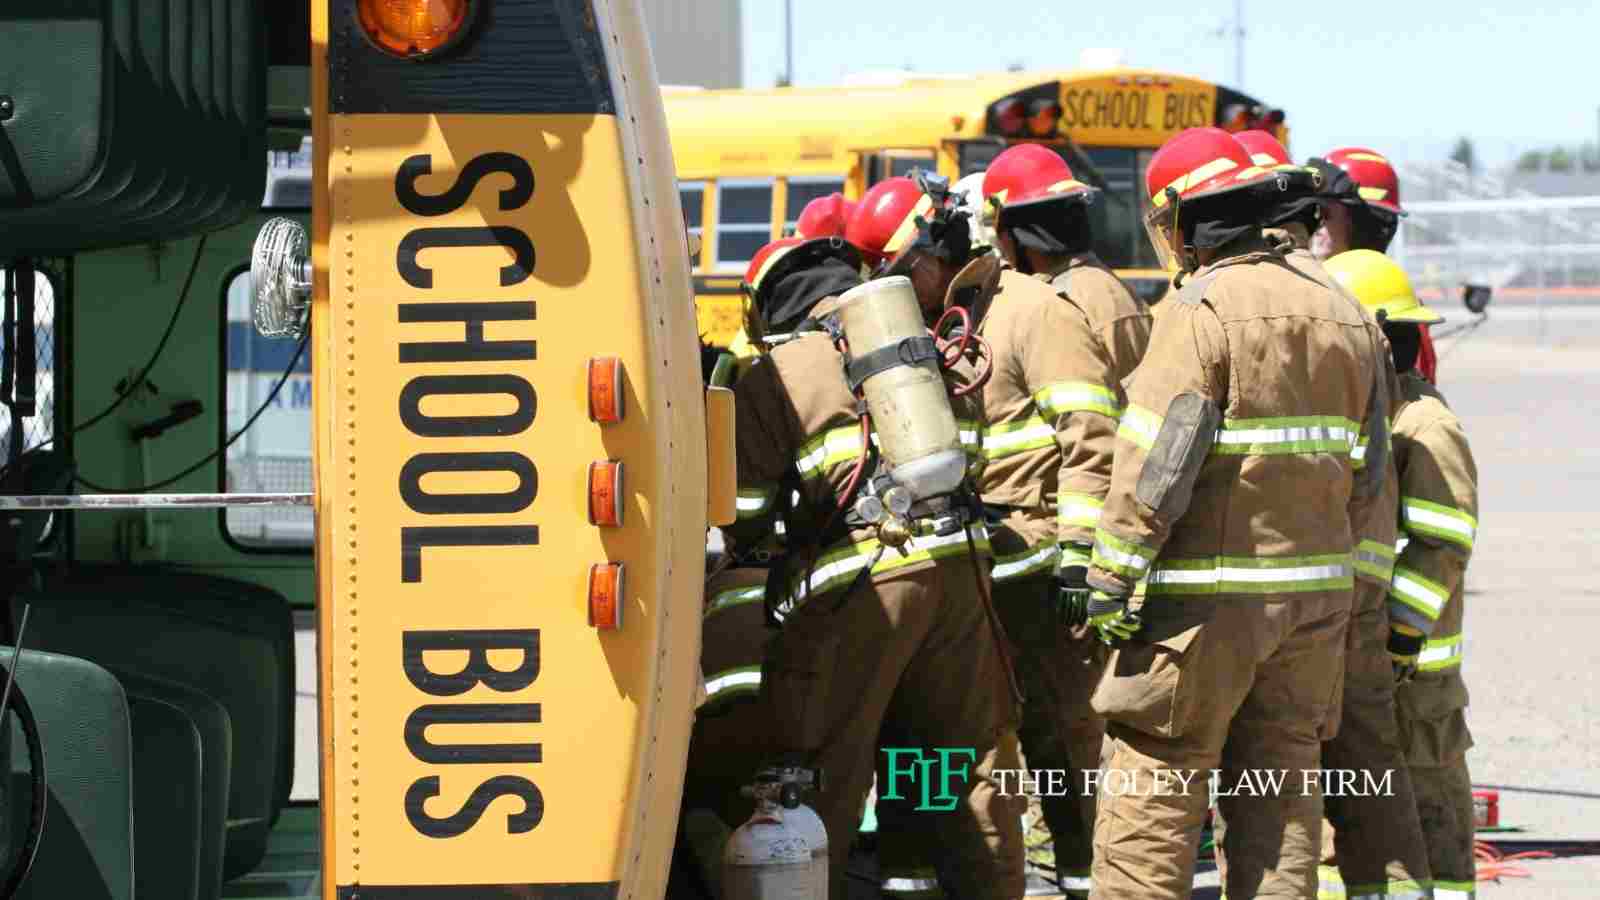 Common causes of bus accidents